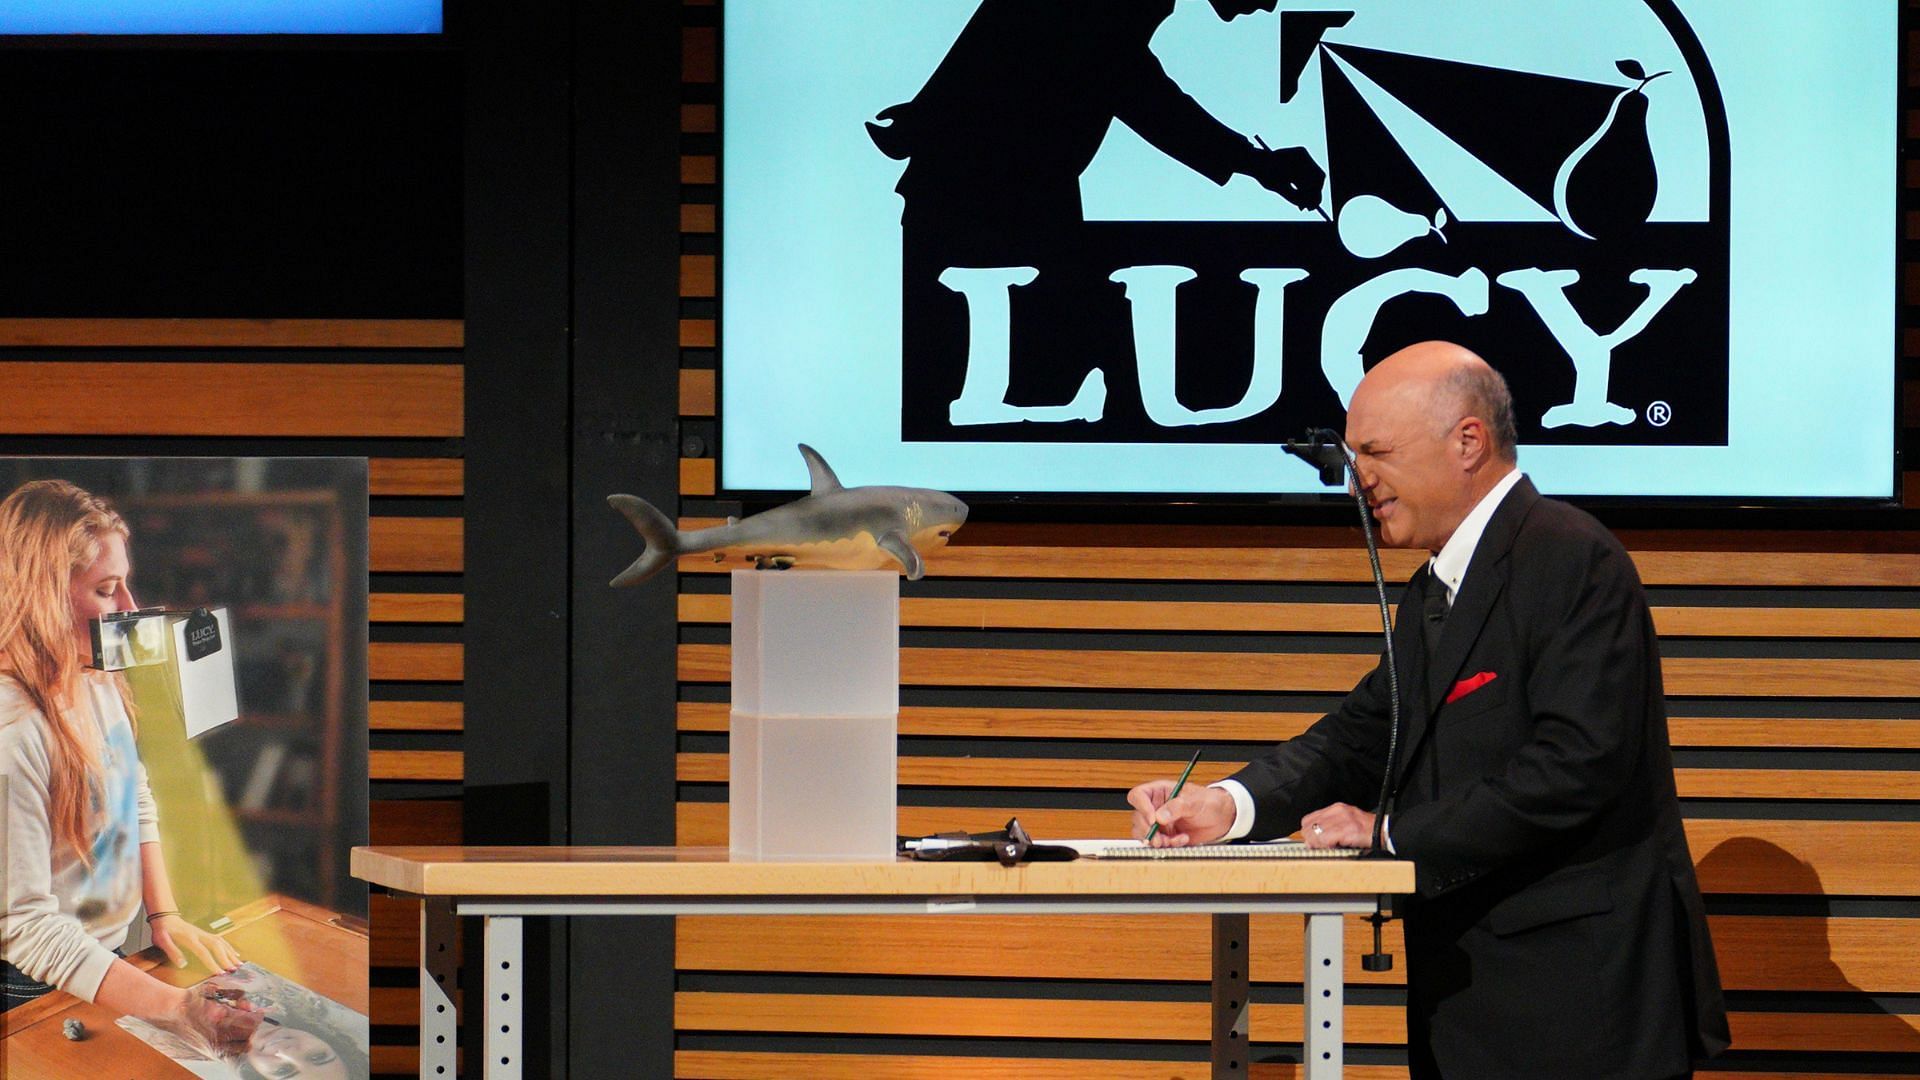 Kevin O&rsquo;Leary trying out Lucy Drawing Tool on Shark Tank (Christopher Willard/ABC)